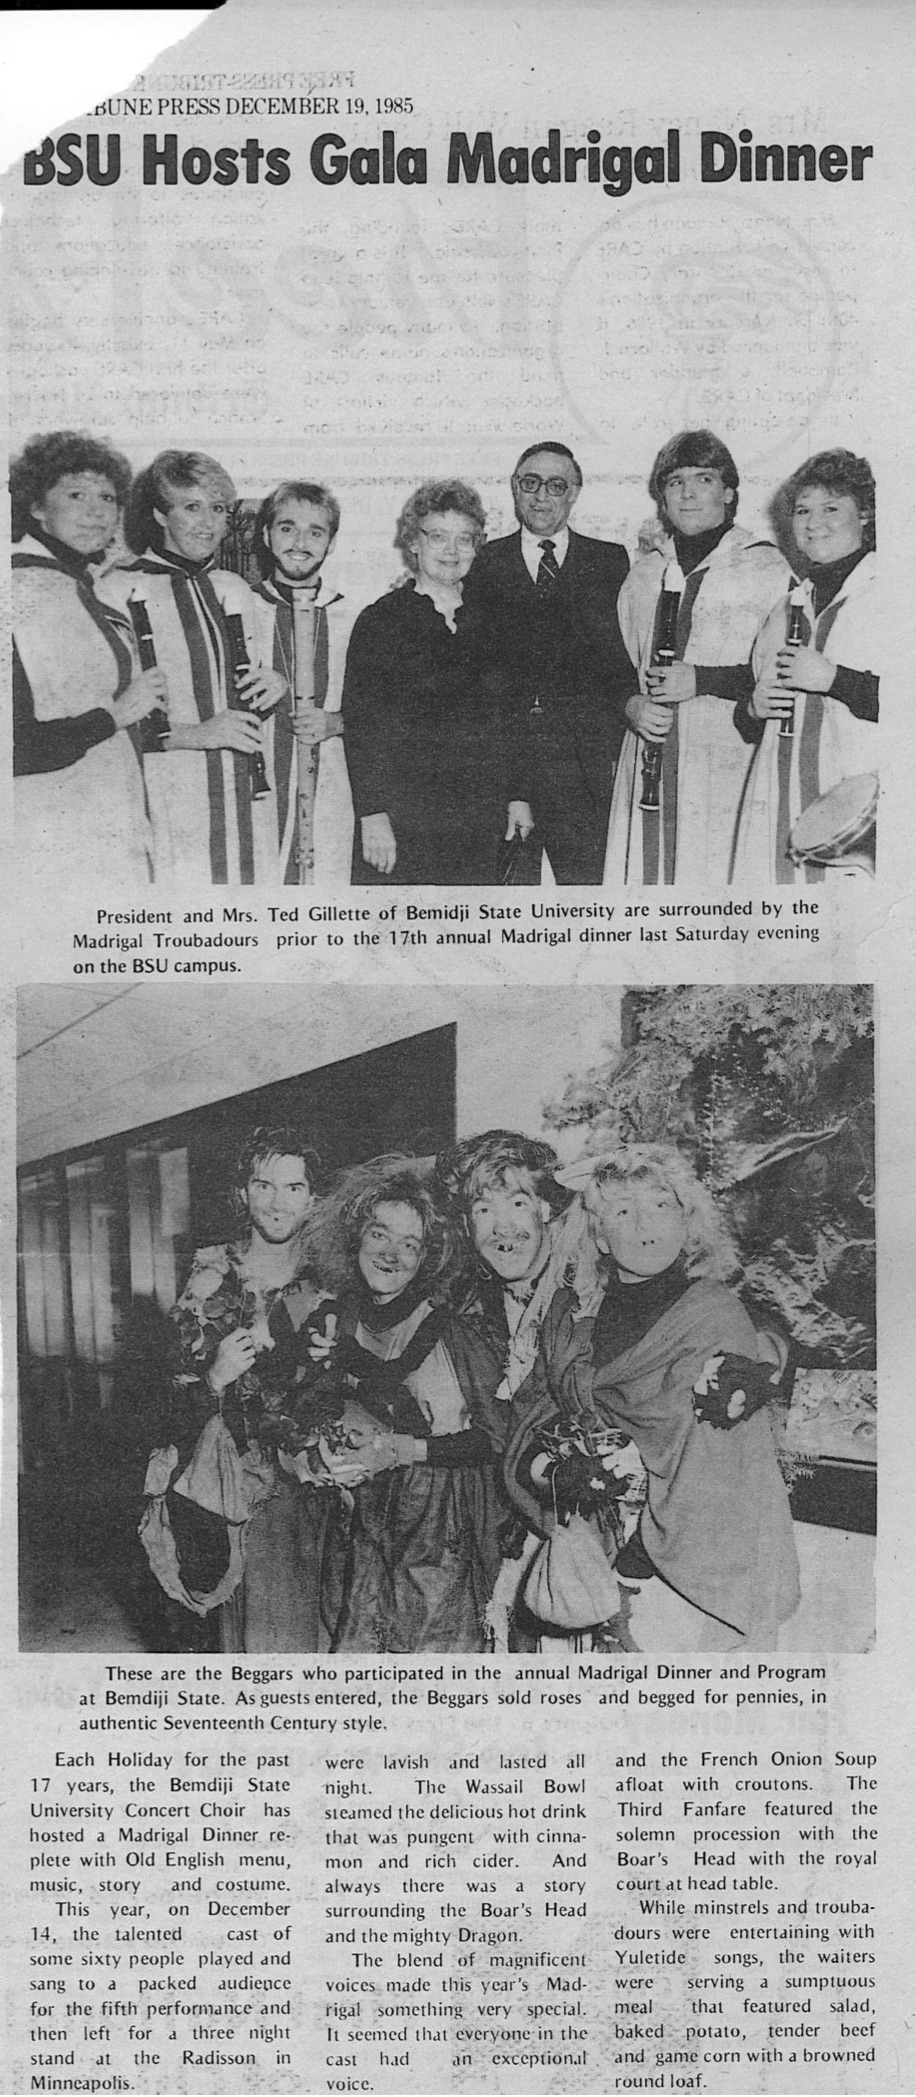 Seventeenth Annual Madrigal Dinners newspaper clipping, 1985.